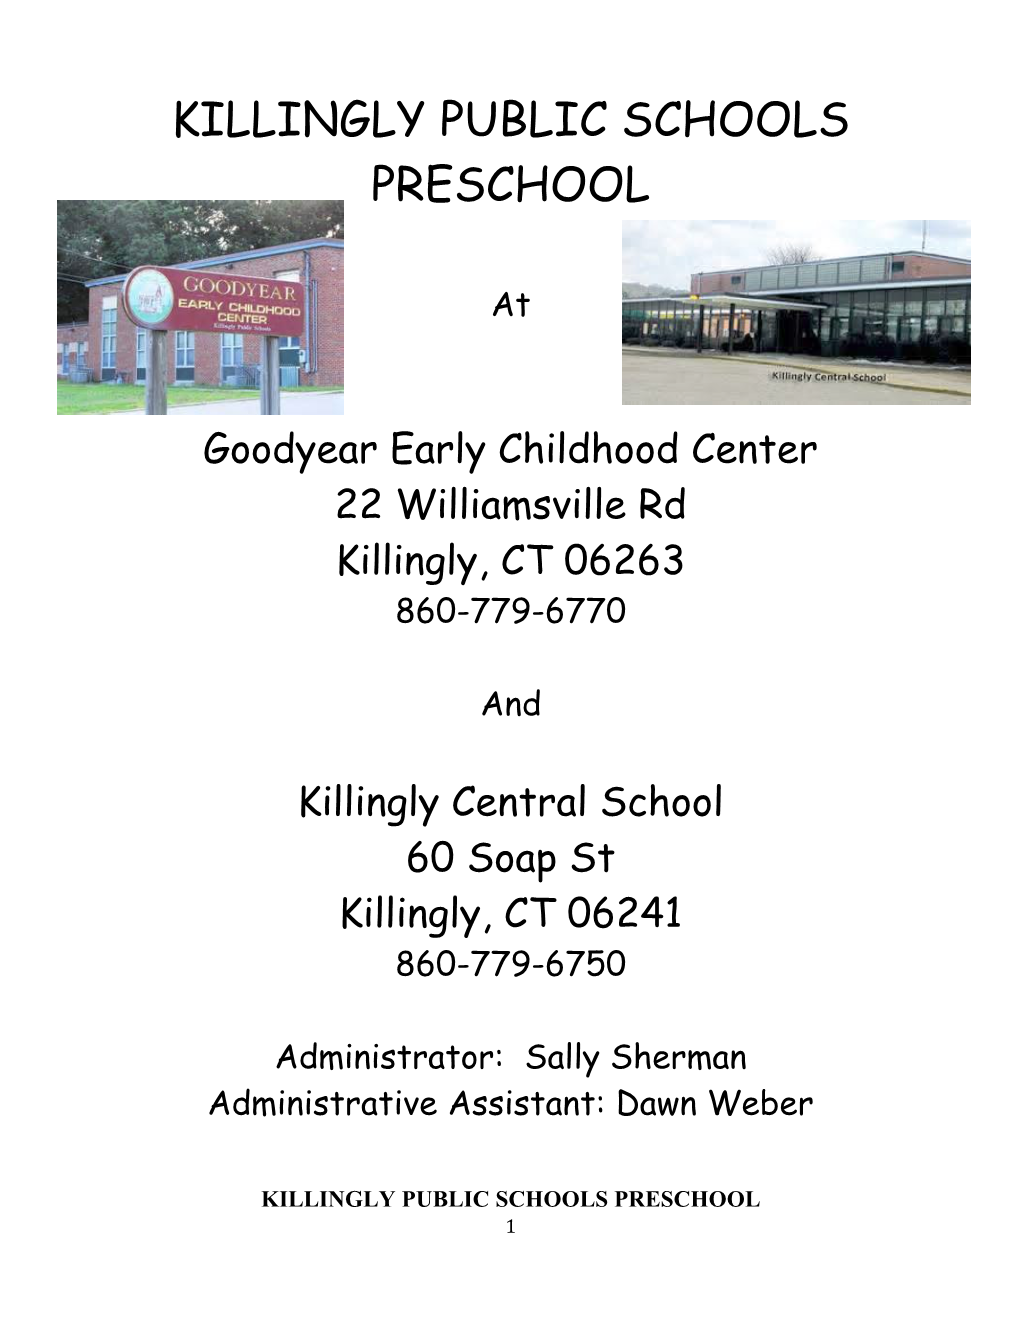 Goodyear Early Childhood Center